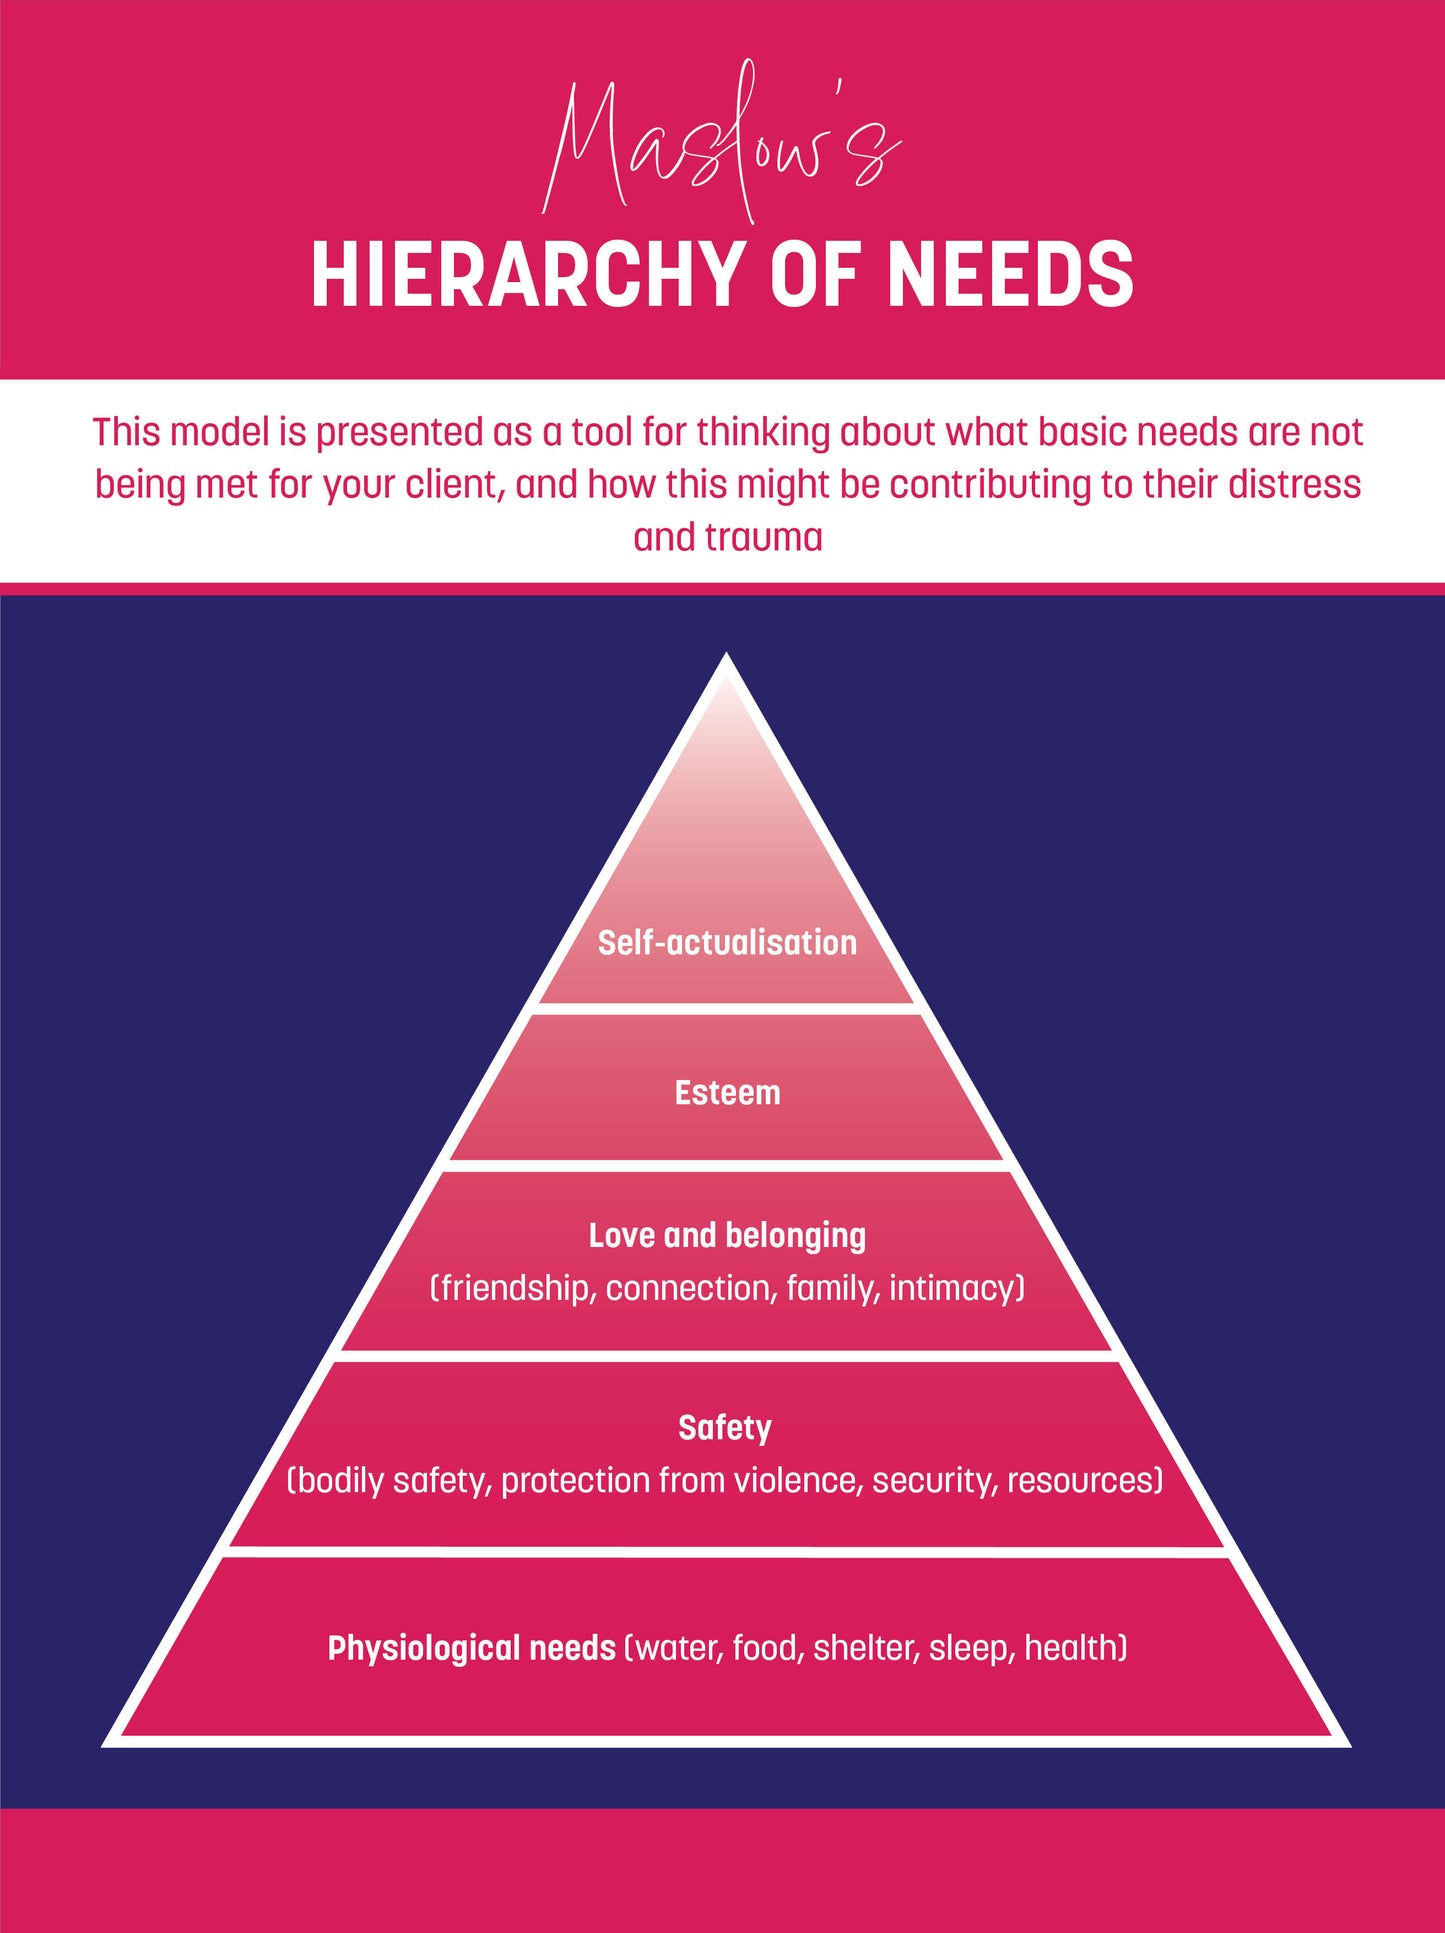 Maslow's Hierarchy of Needs Tool A4 Poster